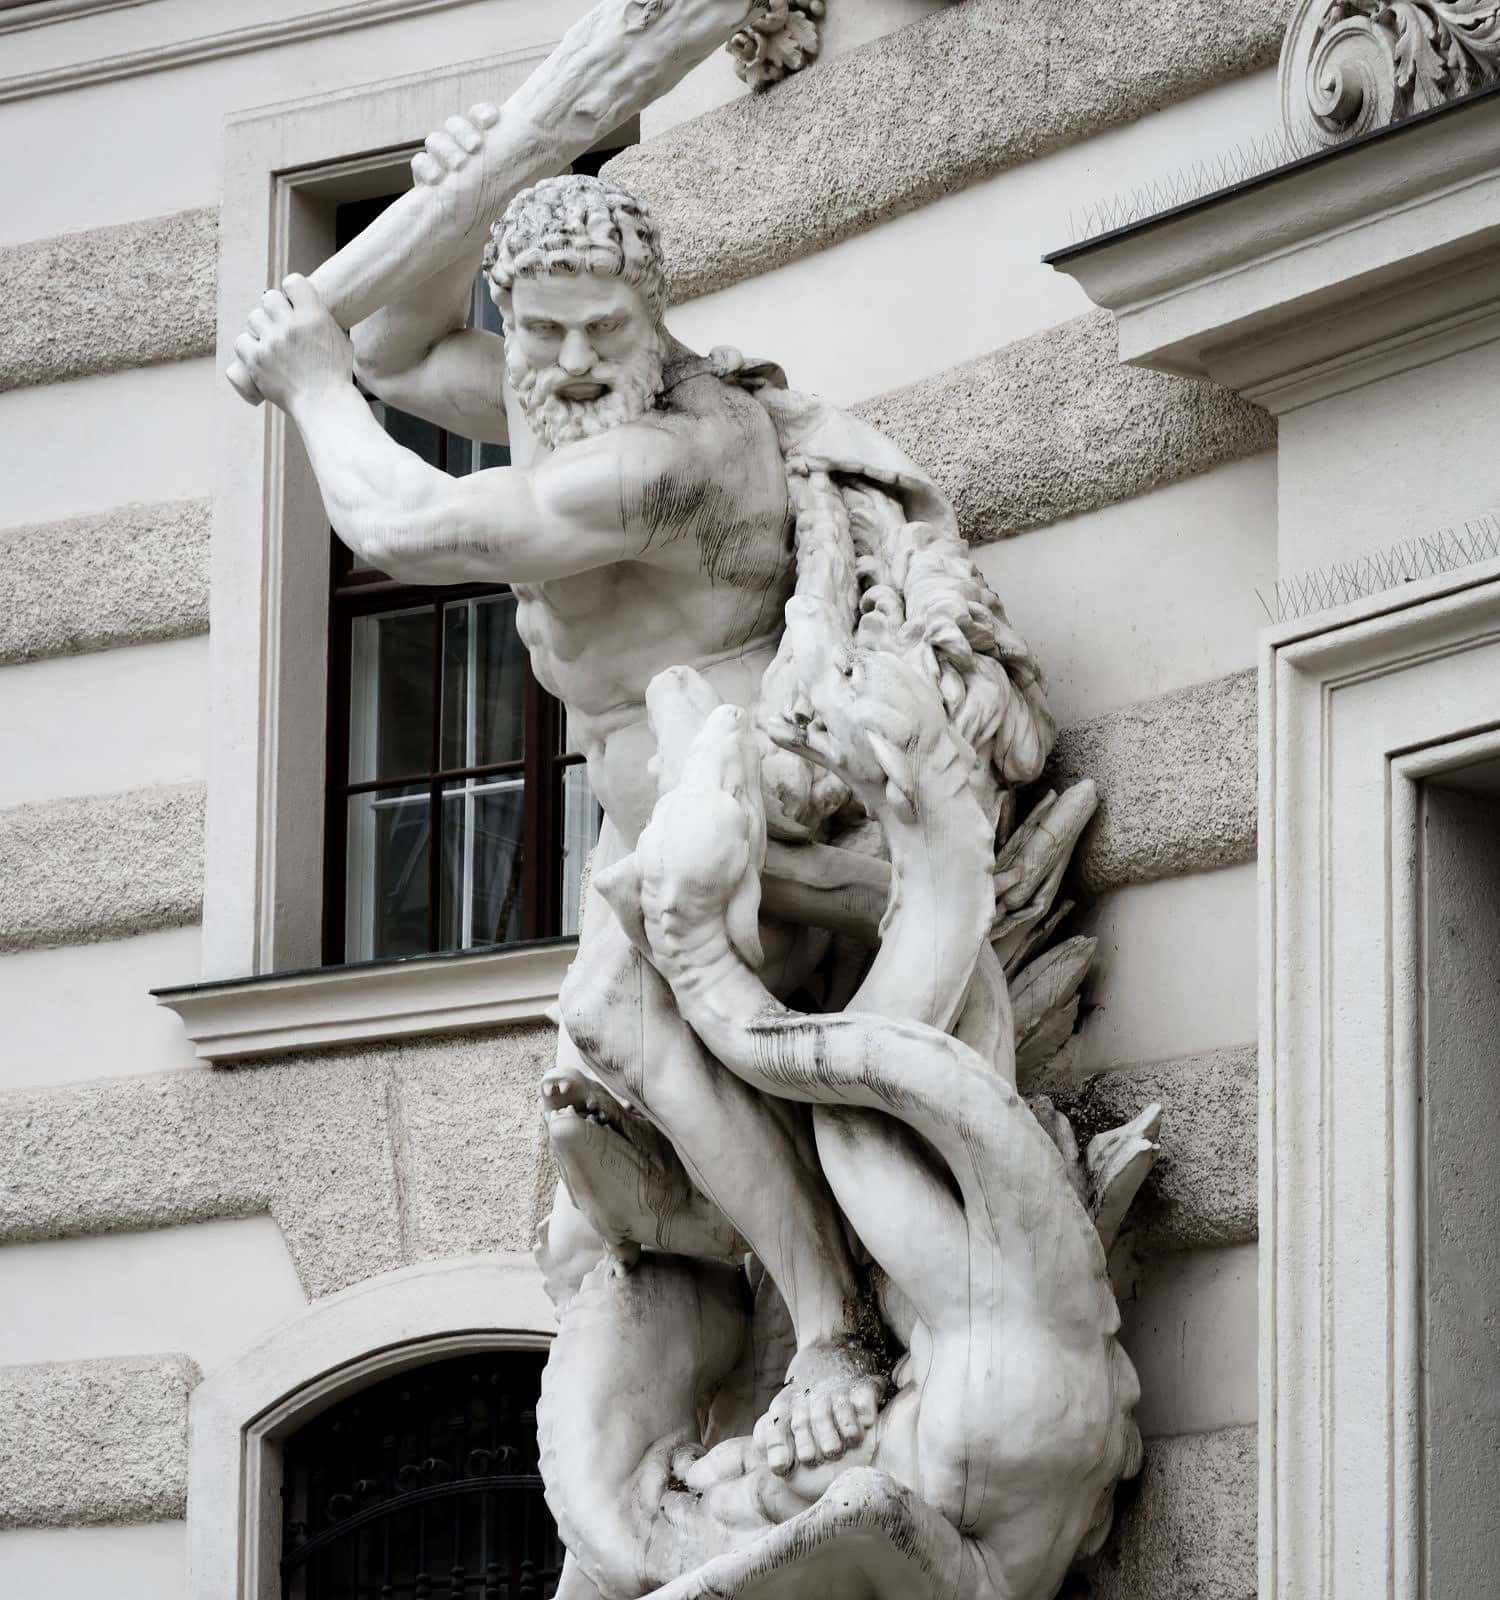 Statue of Heracles defeating the lernaean hydra in Vienna, detail of Hofburg imperial palace facade from Michaelerplatz square